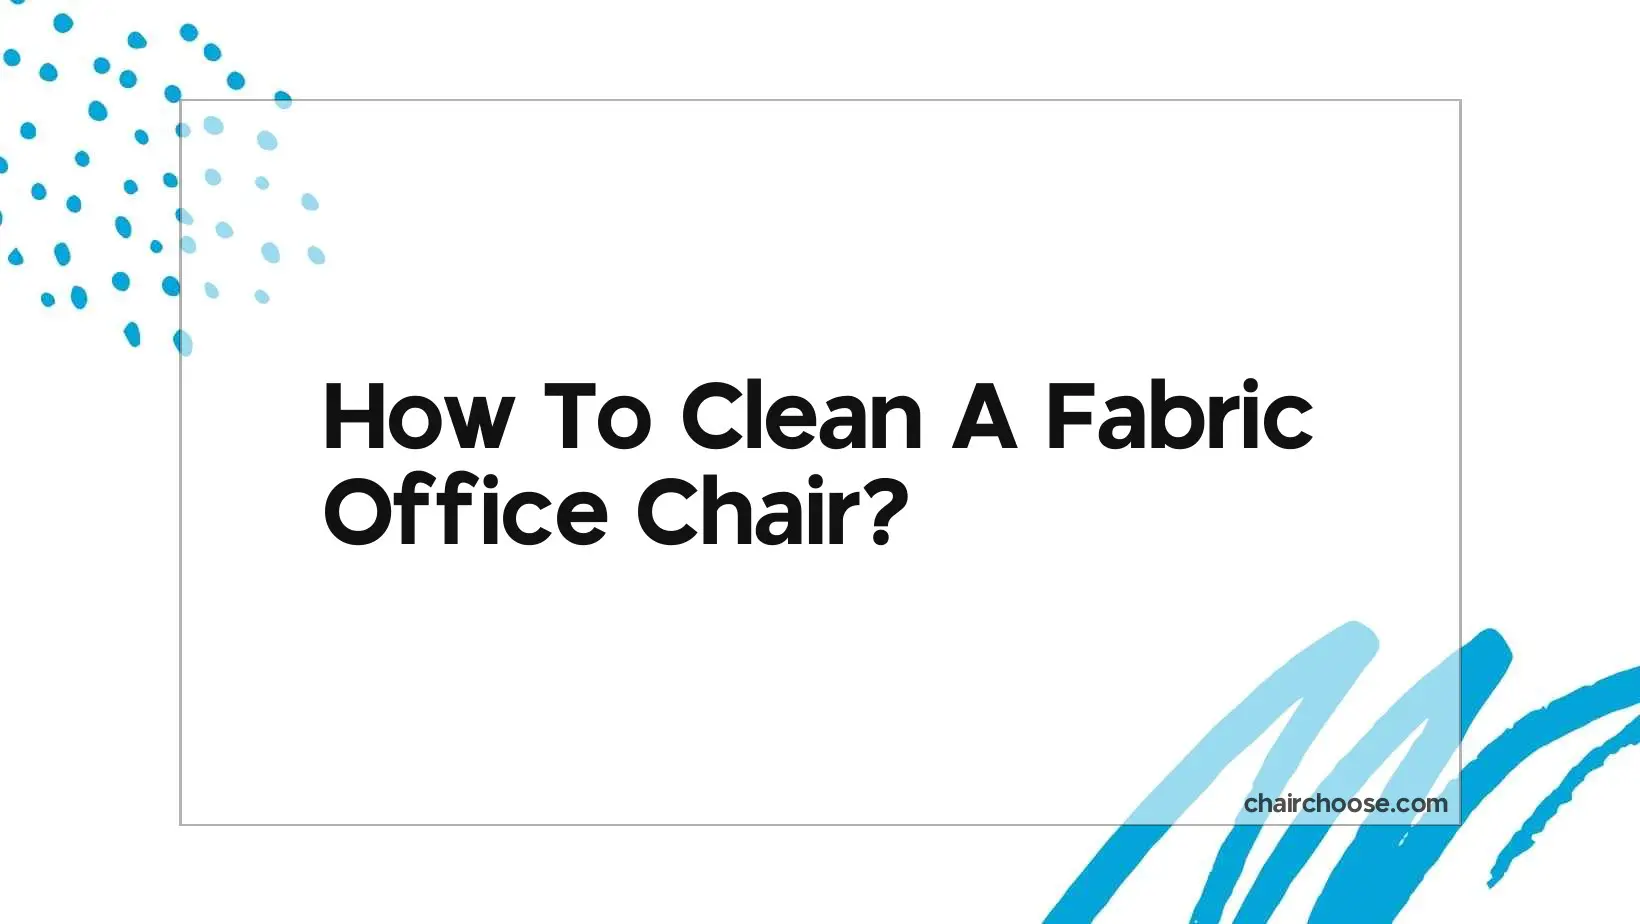 How To Clean A Fabric Office Chair?